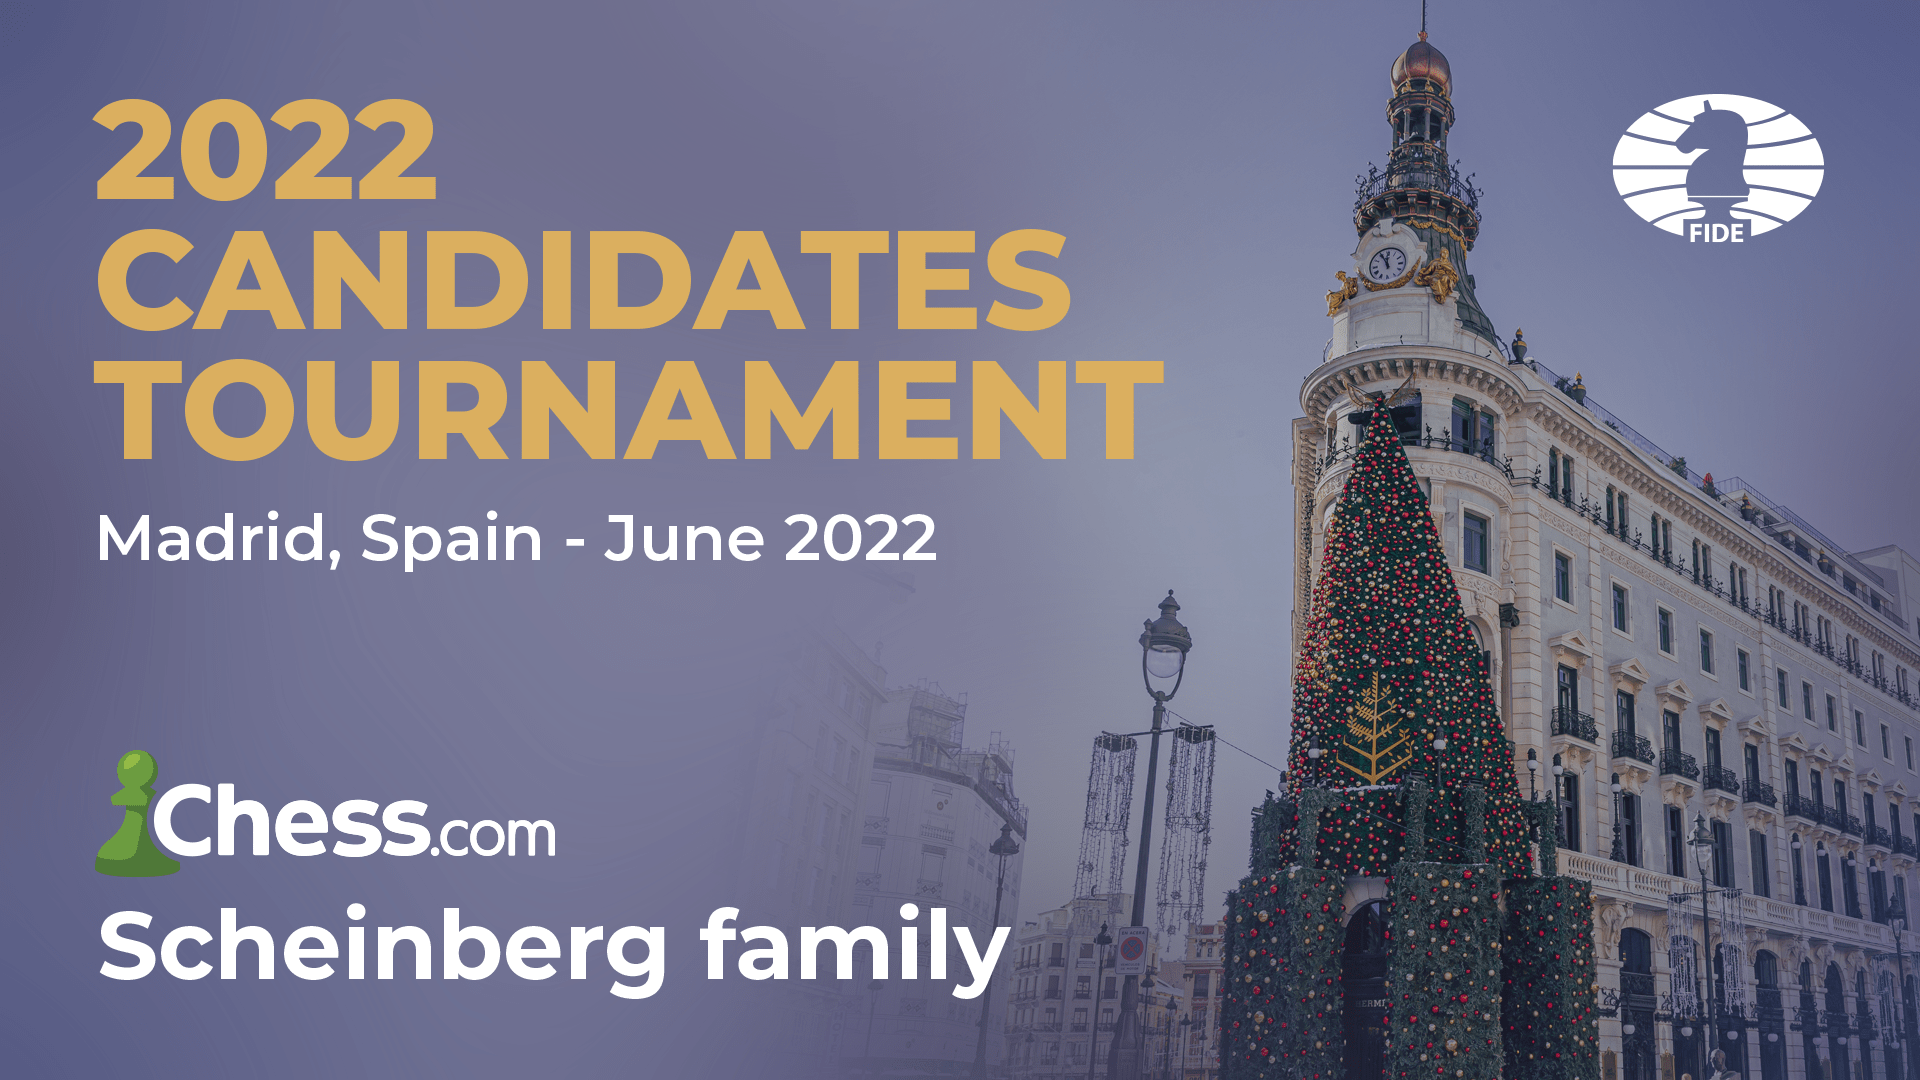 Candidates Tournament To Take Place June 2022 In Madrid Sponsored By   